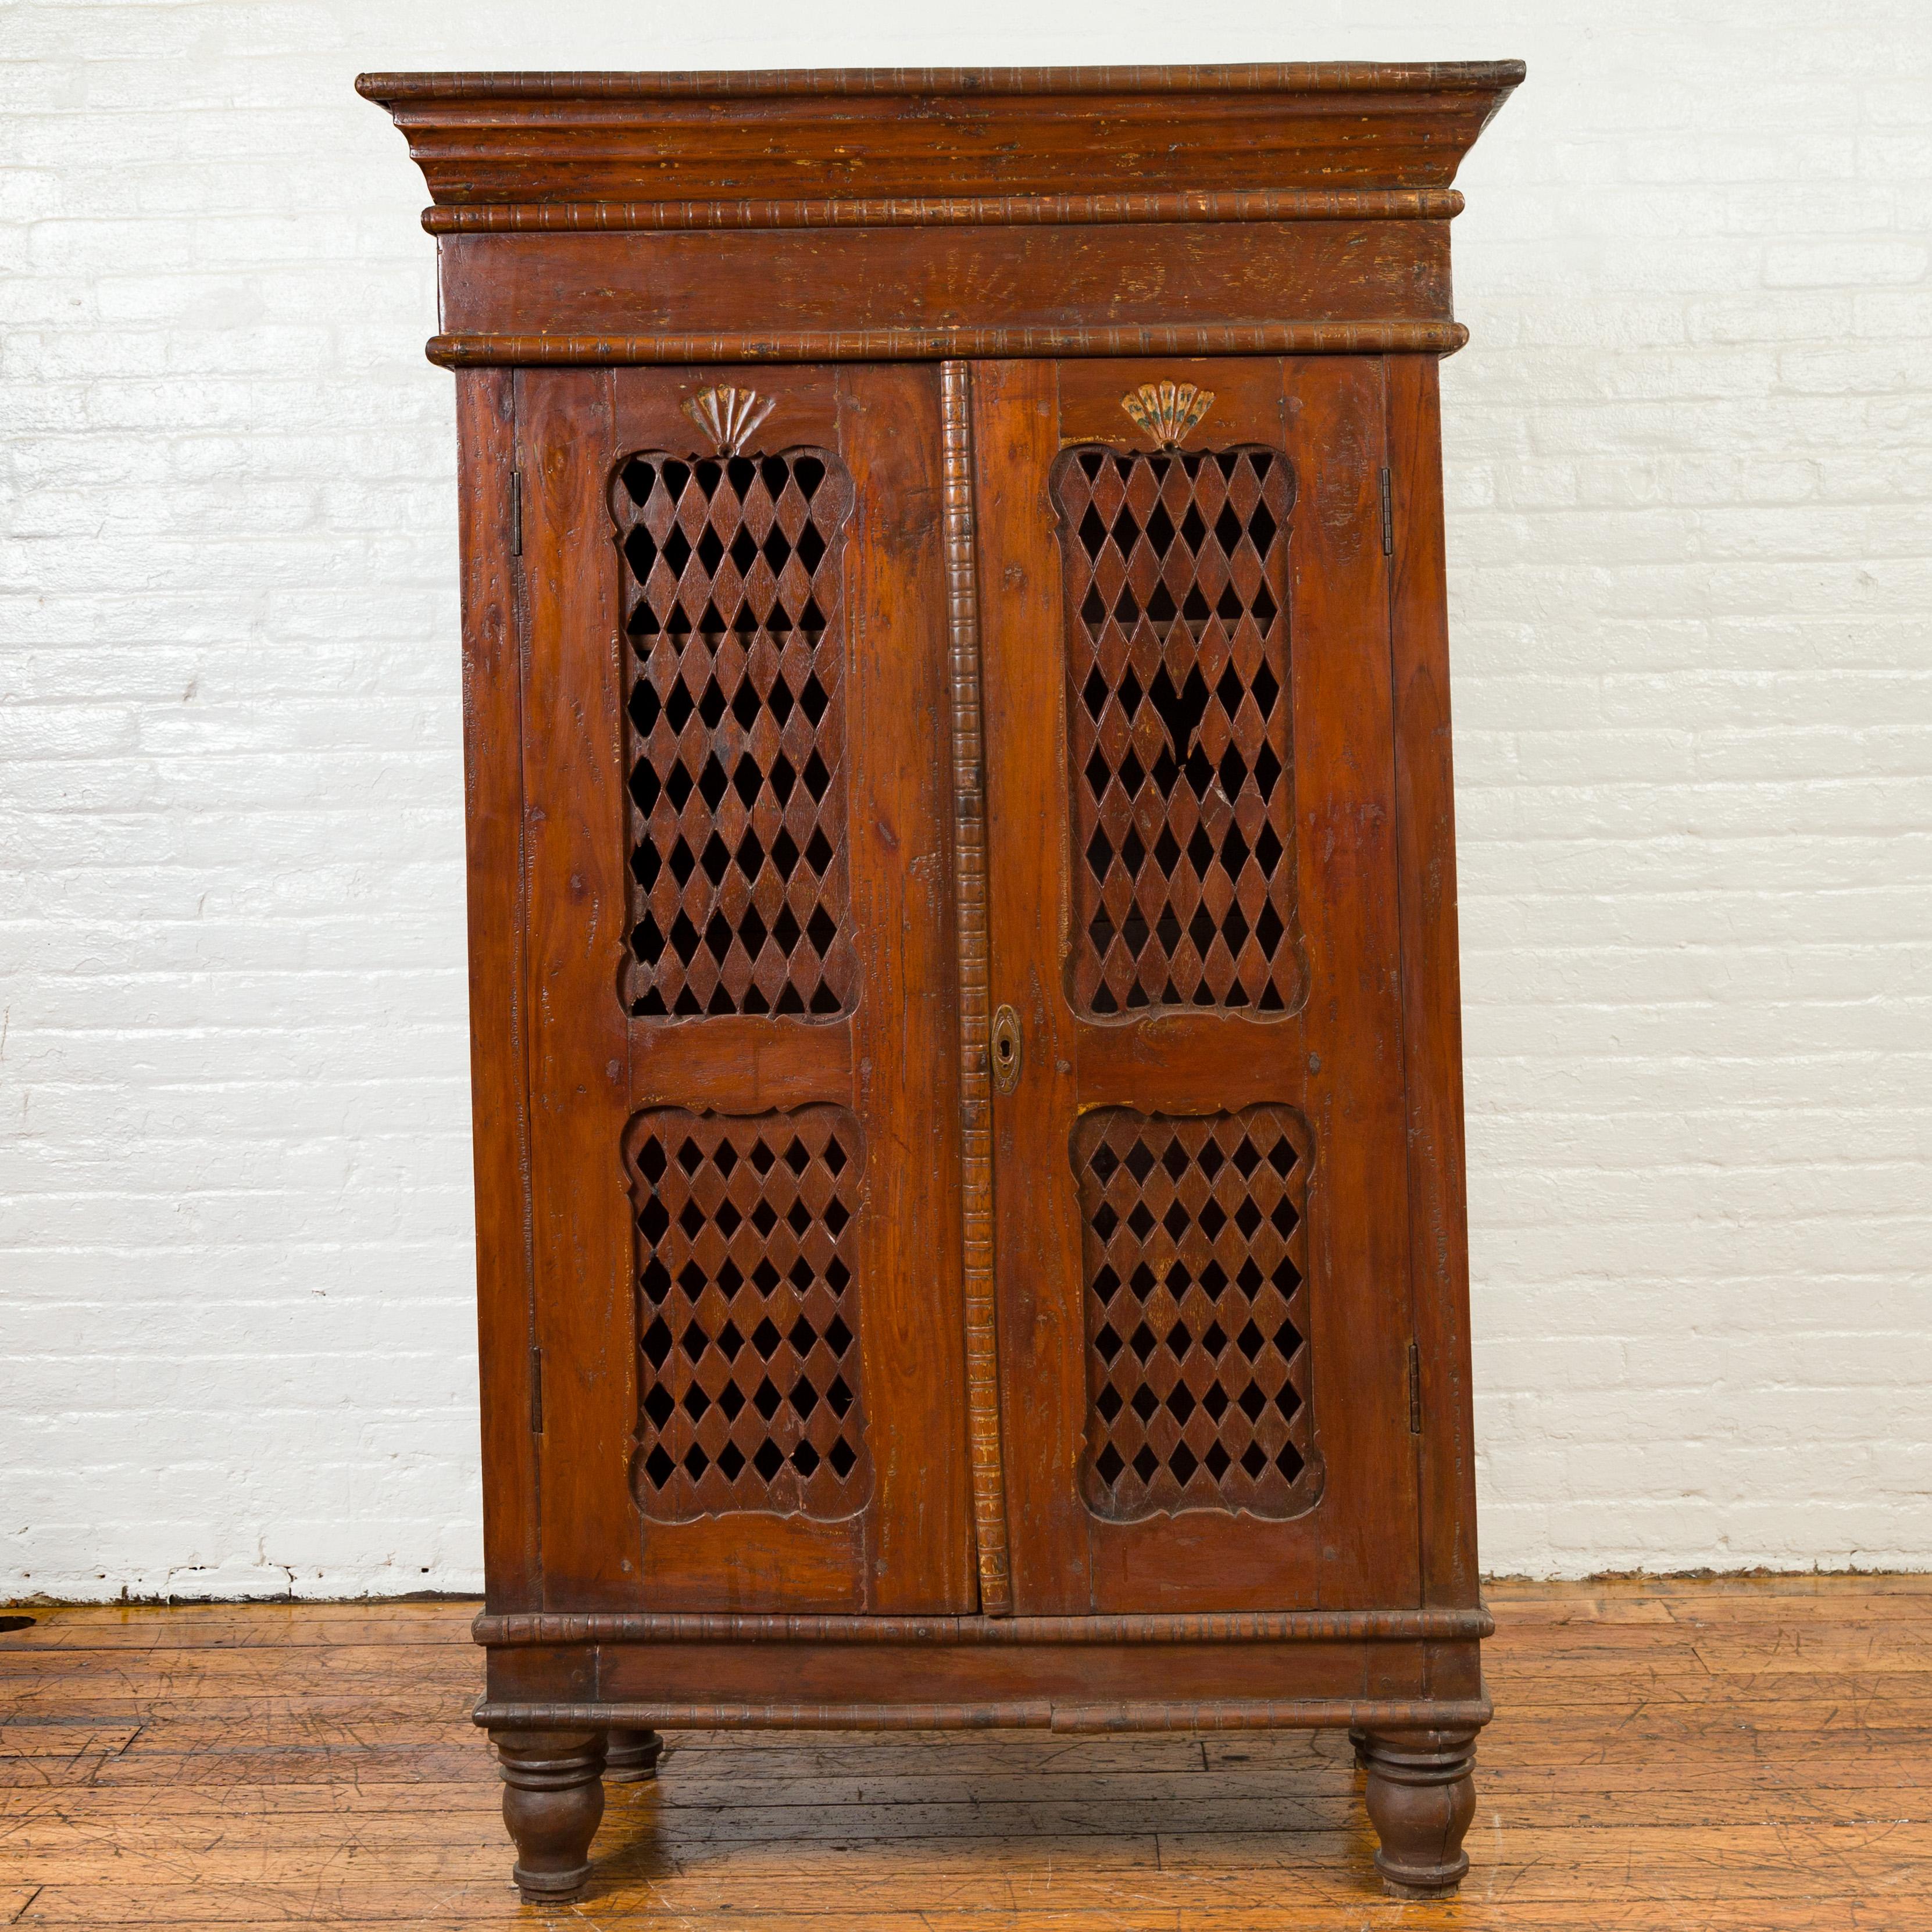 An antique Indian hand carved wooden kitchen cabinet from the 19th century, with open diamond design. Born in India during the 19th century, this cabinet features a beveled cornice sitting above two large doors. Each door is adorned with scrolling